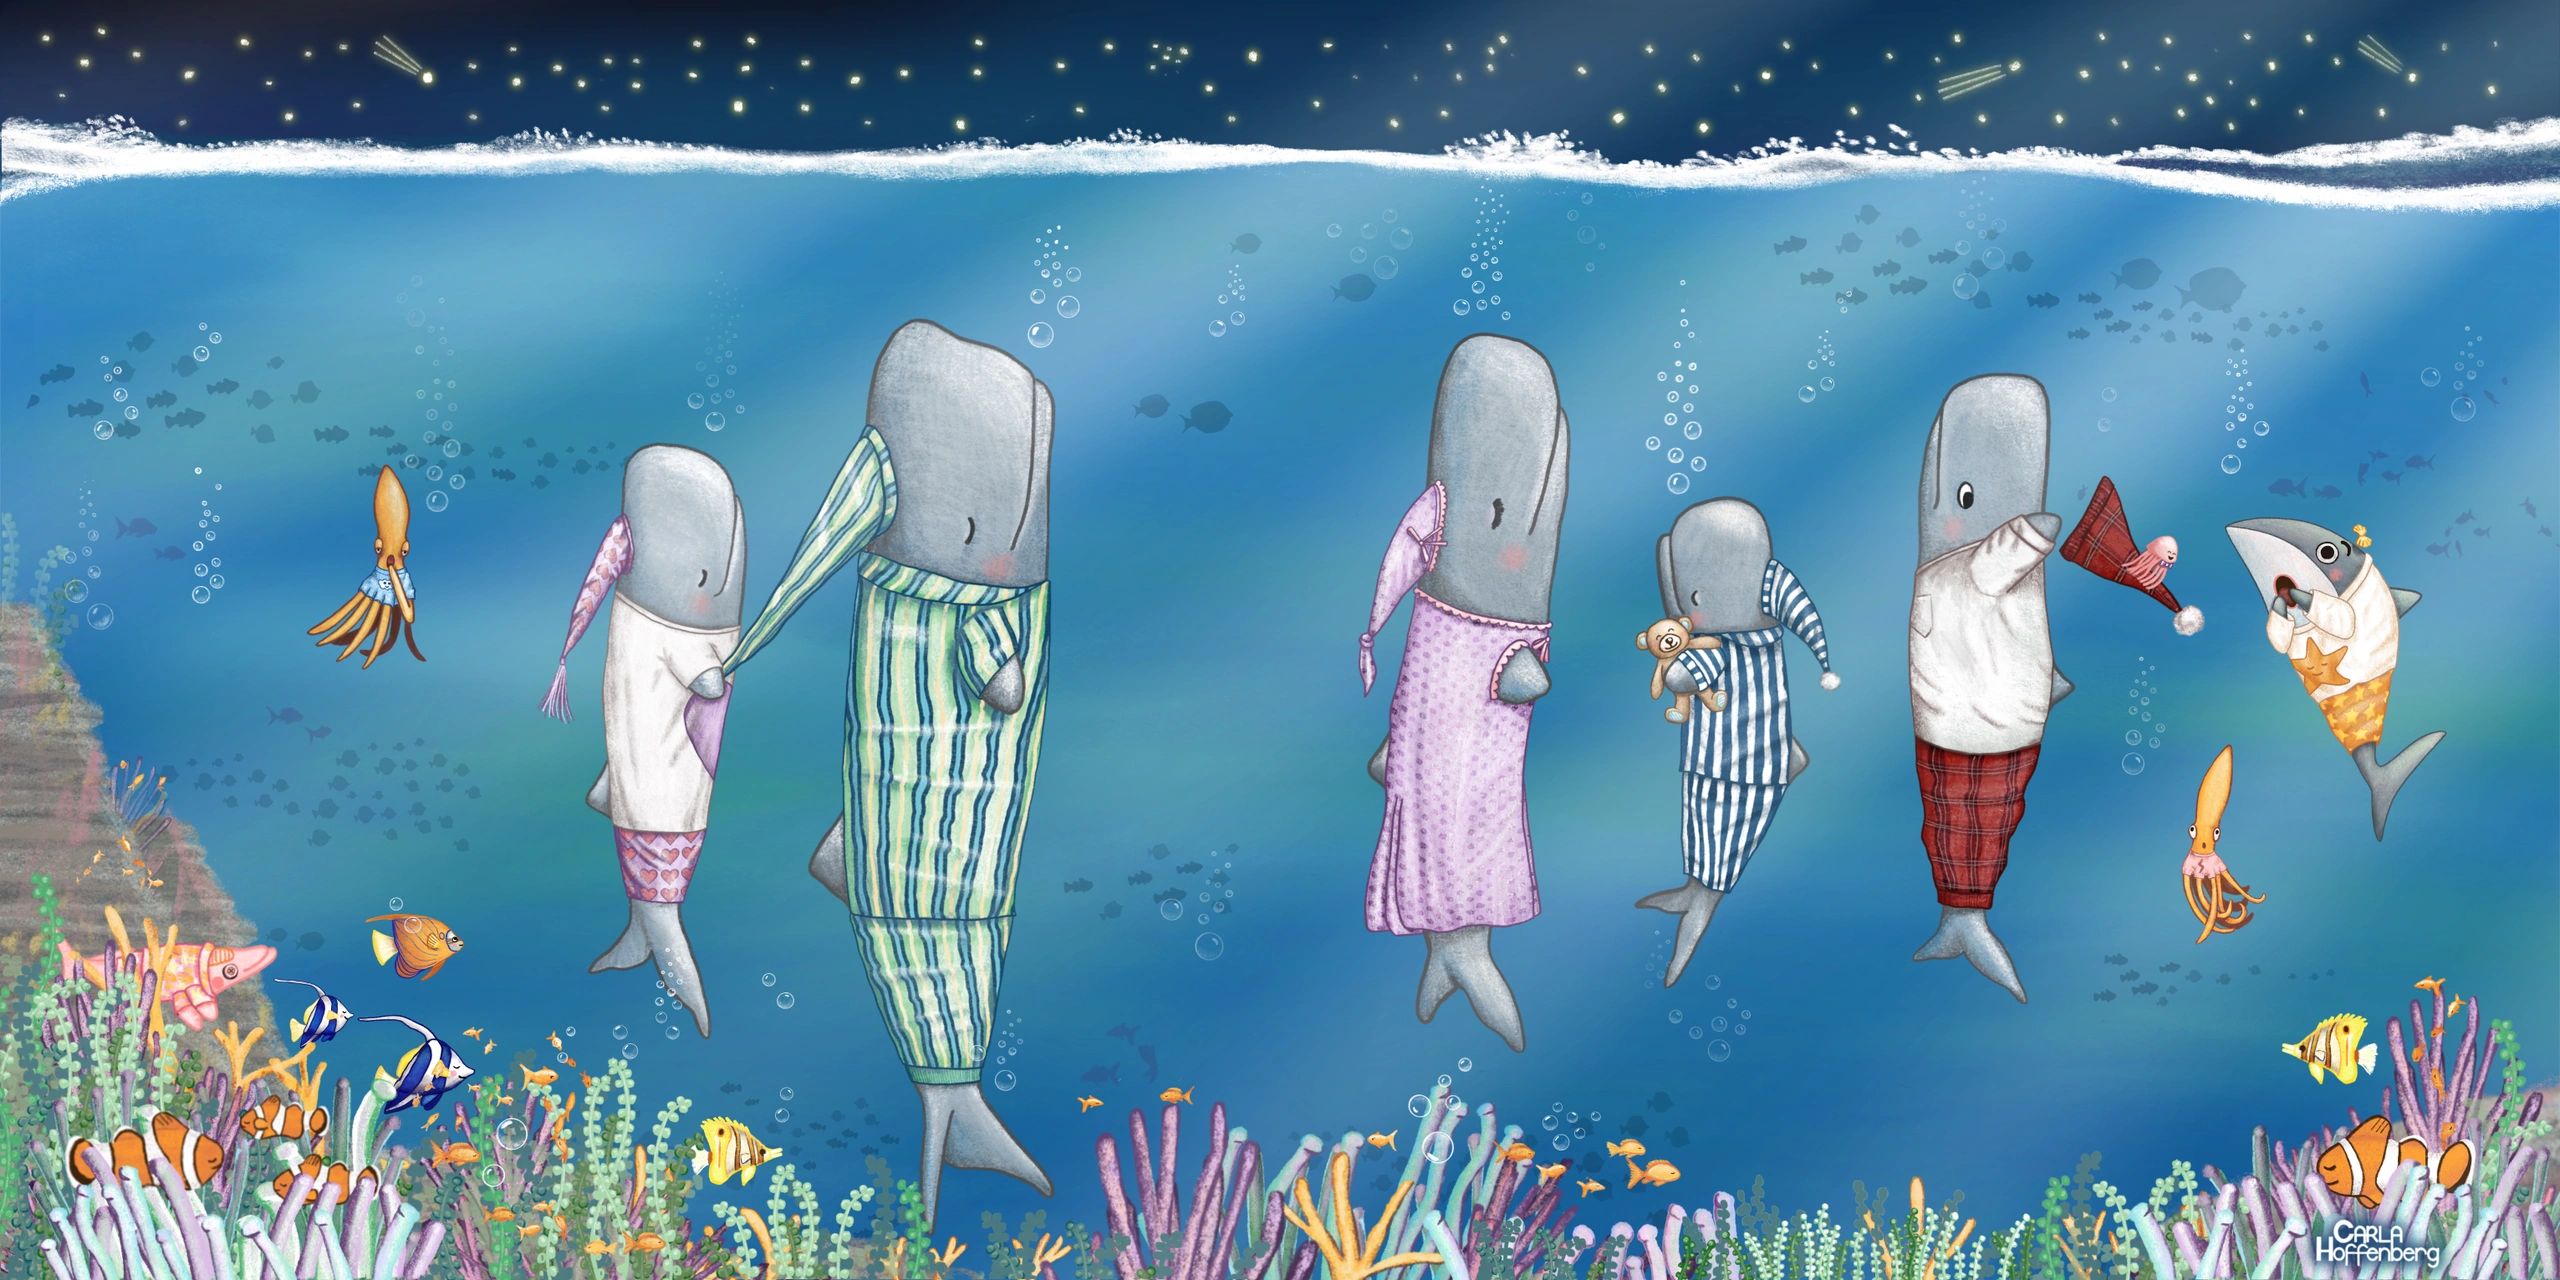 Sleeping Sperm Whales
Spread from upcoming book “Ssshhh… Lulu is sleeping”